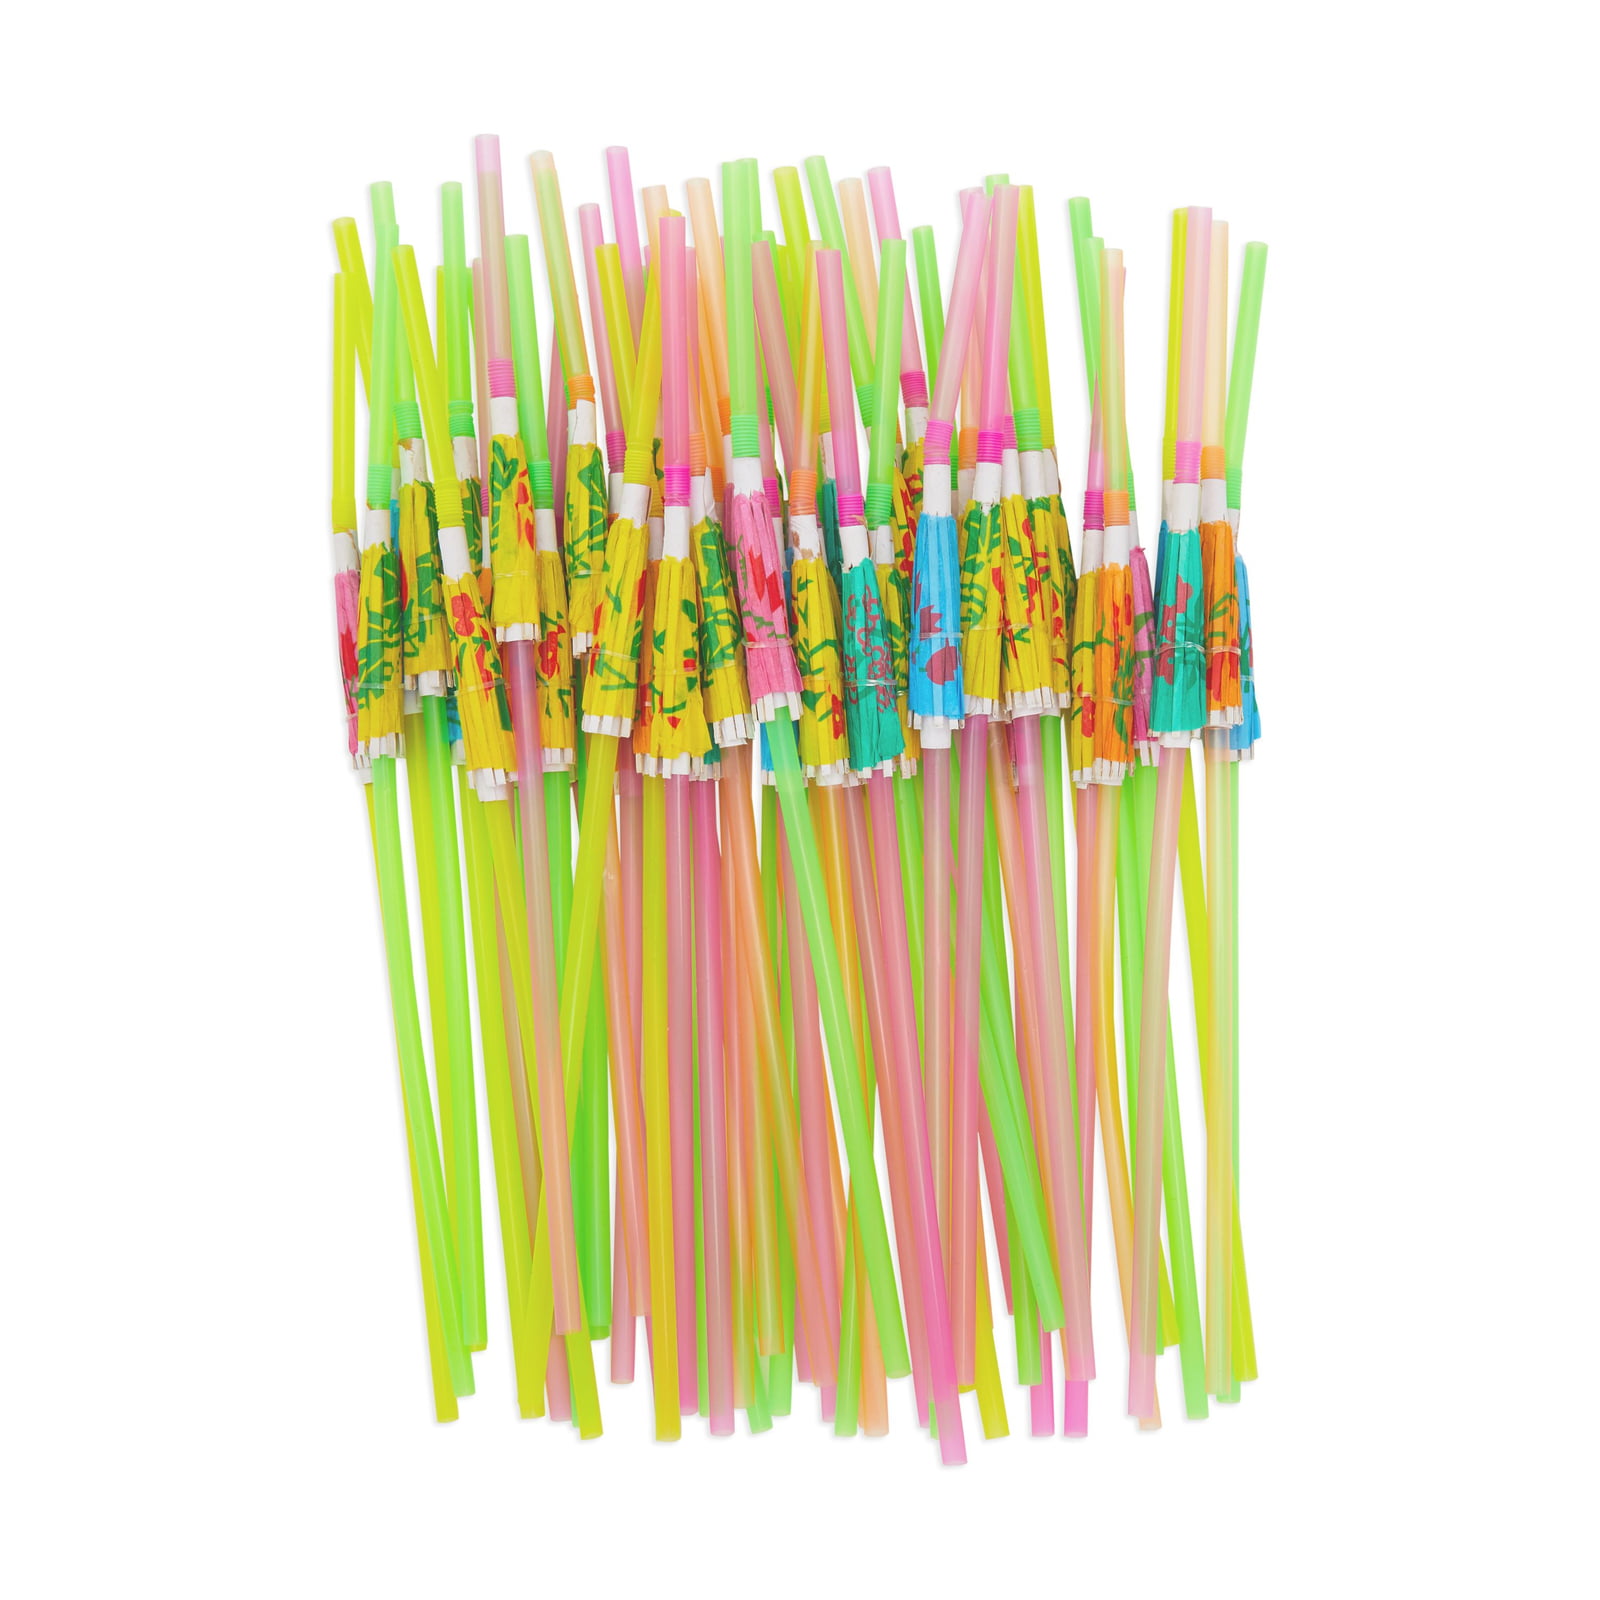 Includes 100 Pieces Palm Tree Picks Mixed Color 200 Pieces Cocktail Decoration Party Set 50 Pieces Cocktail Umbrellas Picks and 50 Pieces 3D Fruit Straws for Hawaiian Tropical Party Decoration